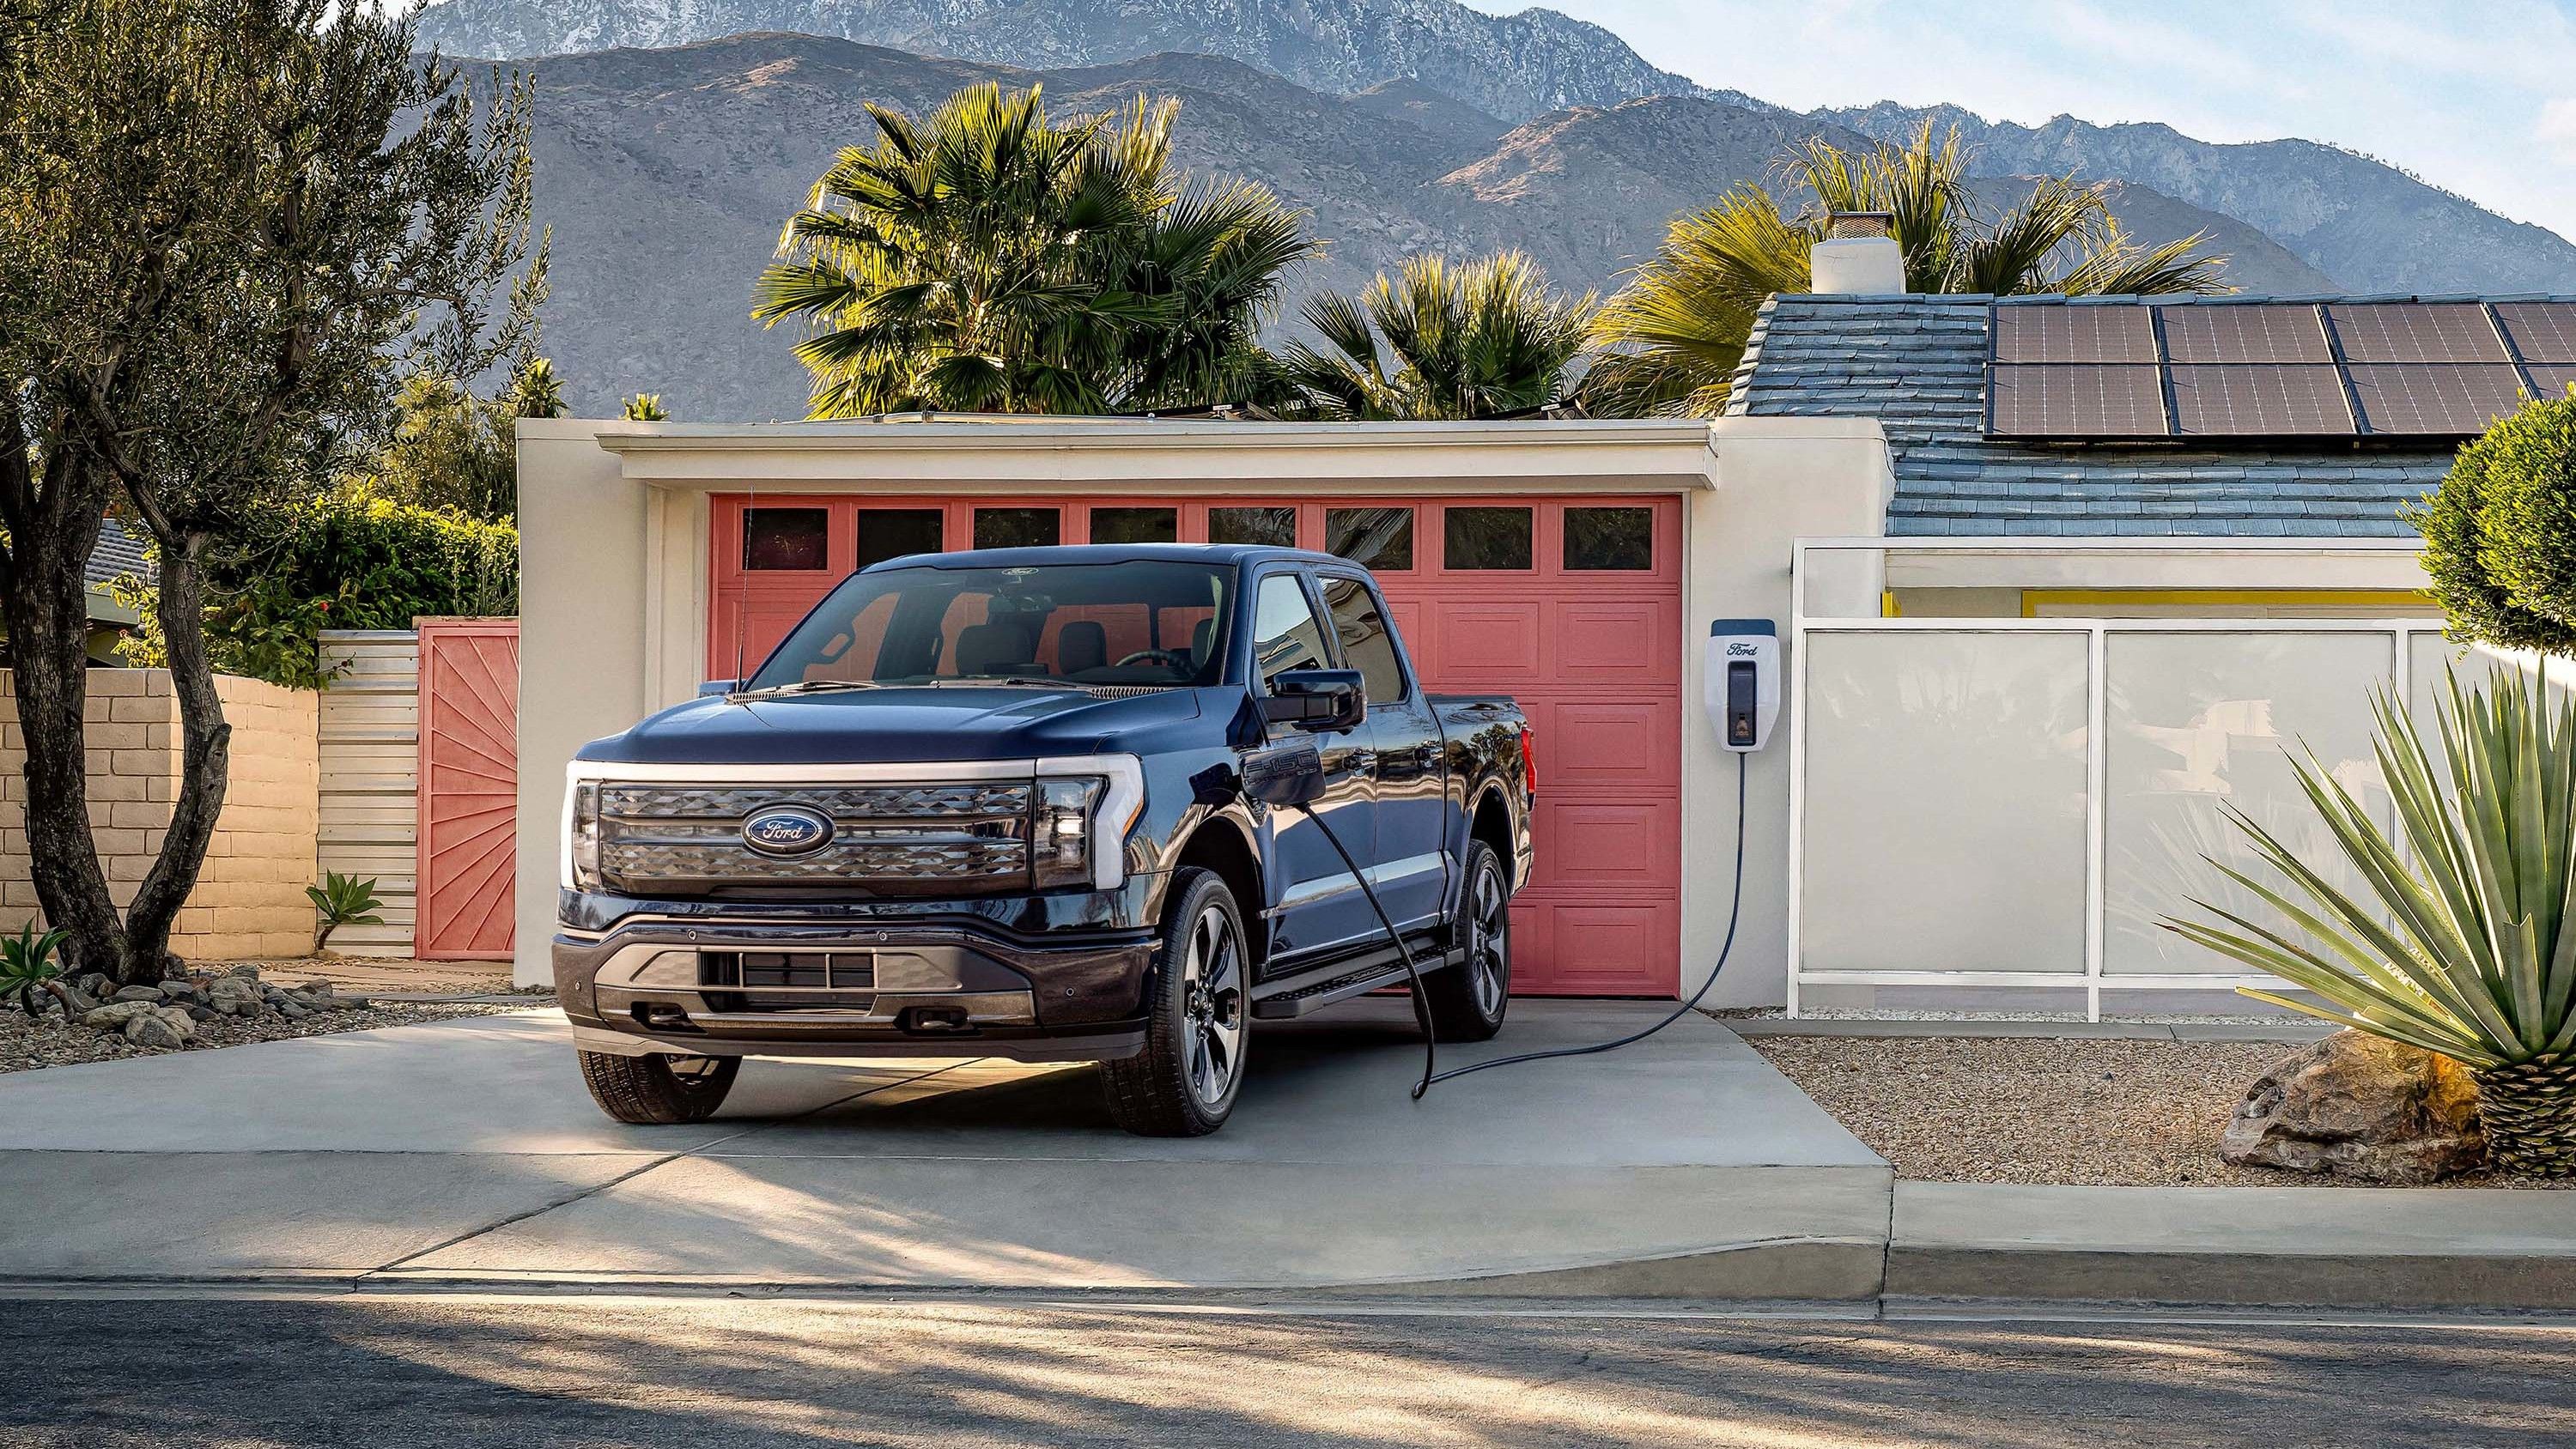 Ford F-150 Lightning while charging